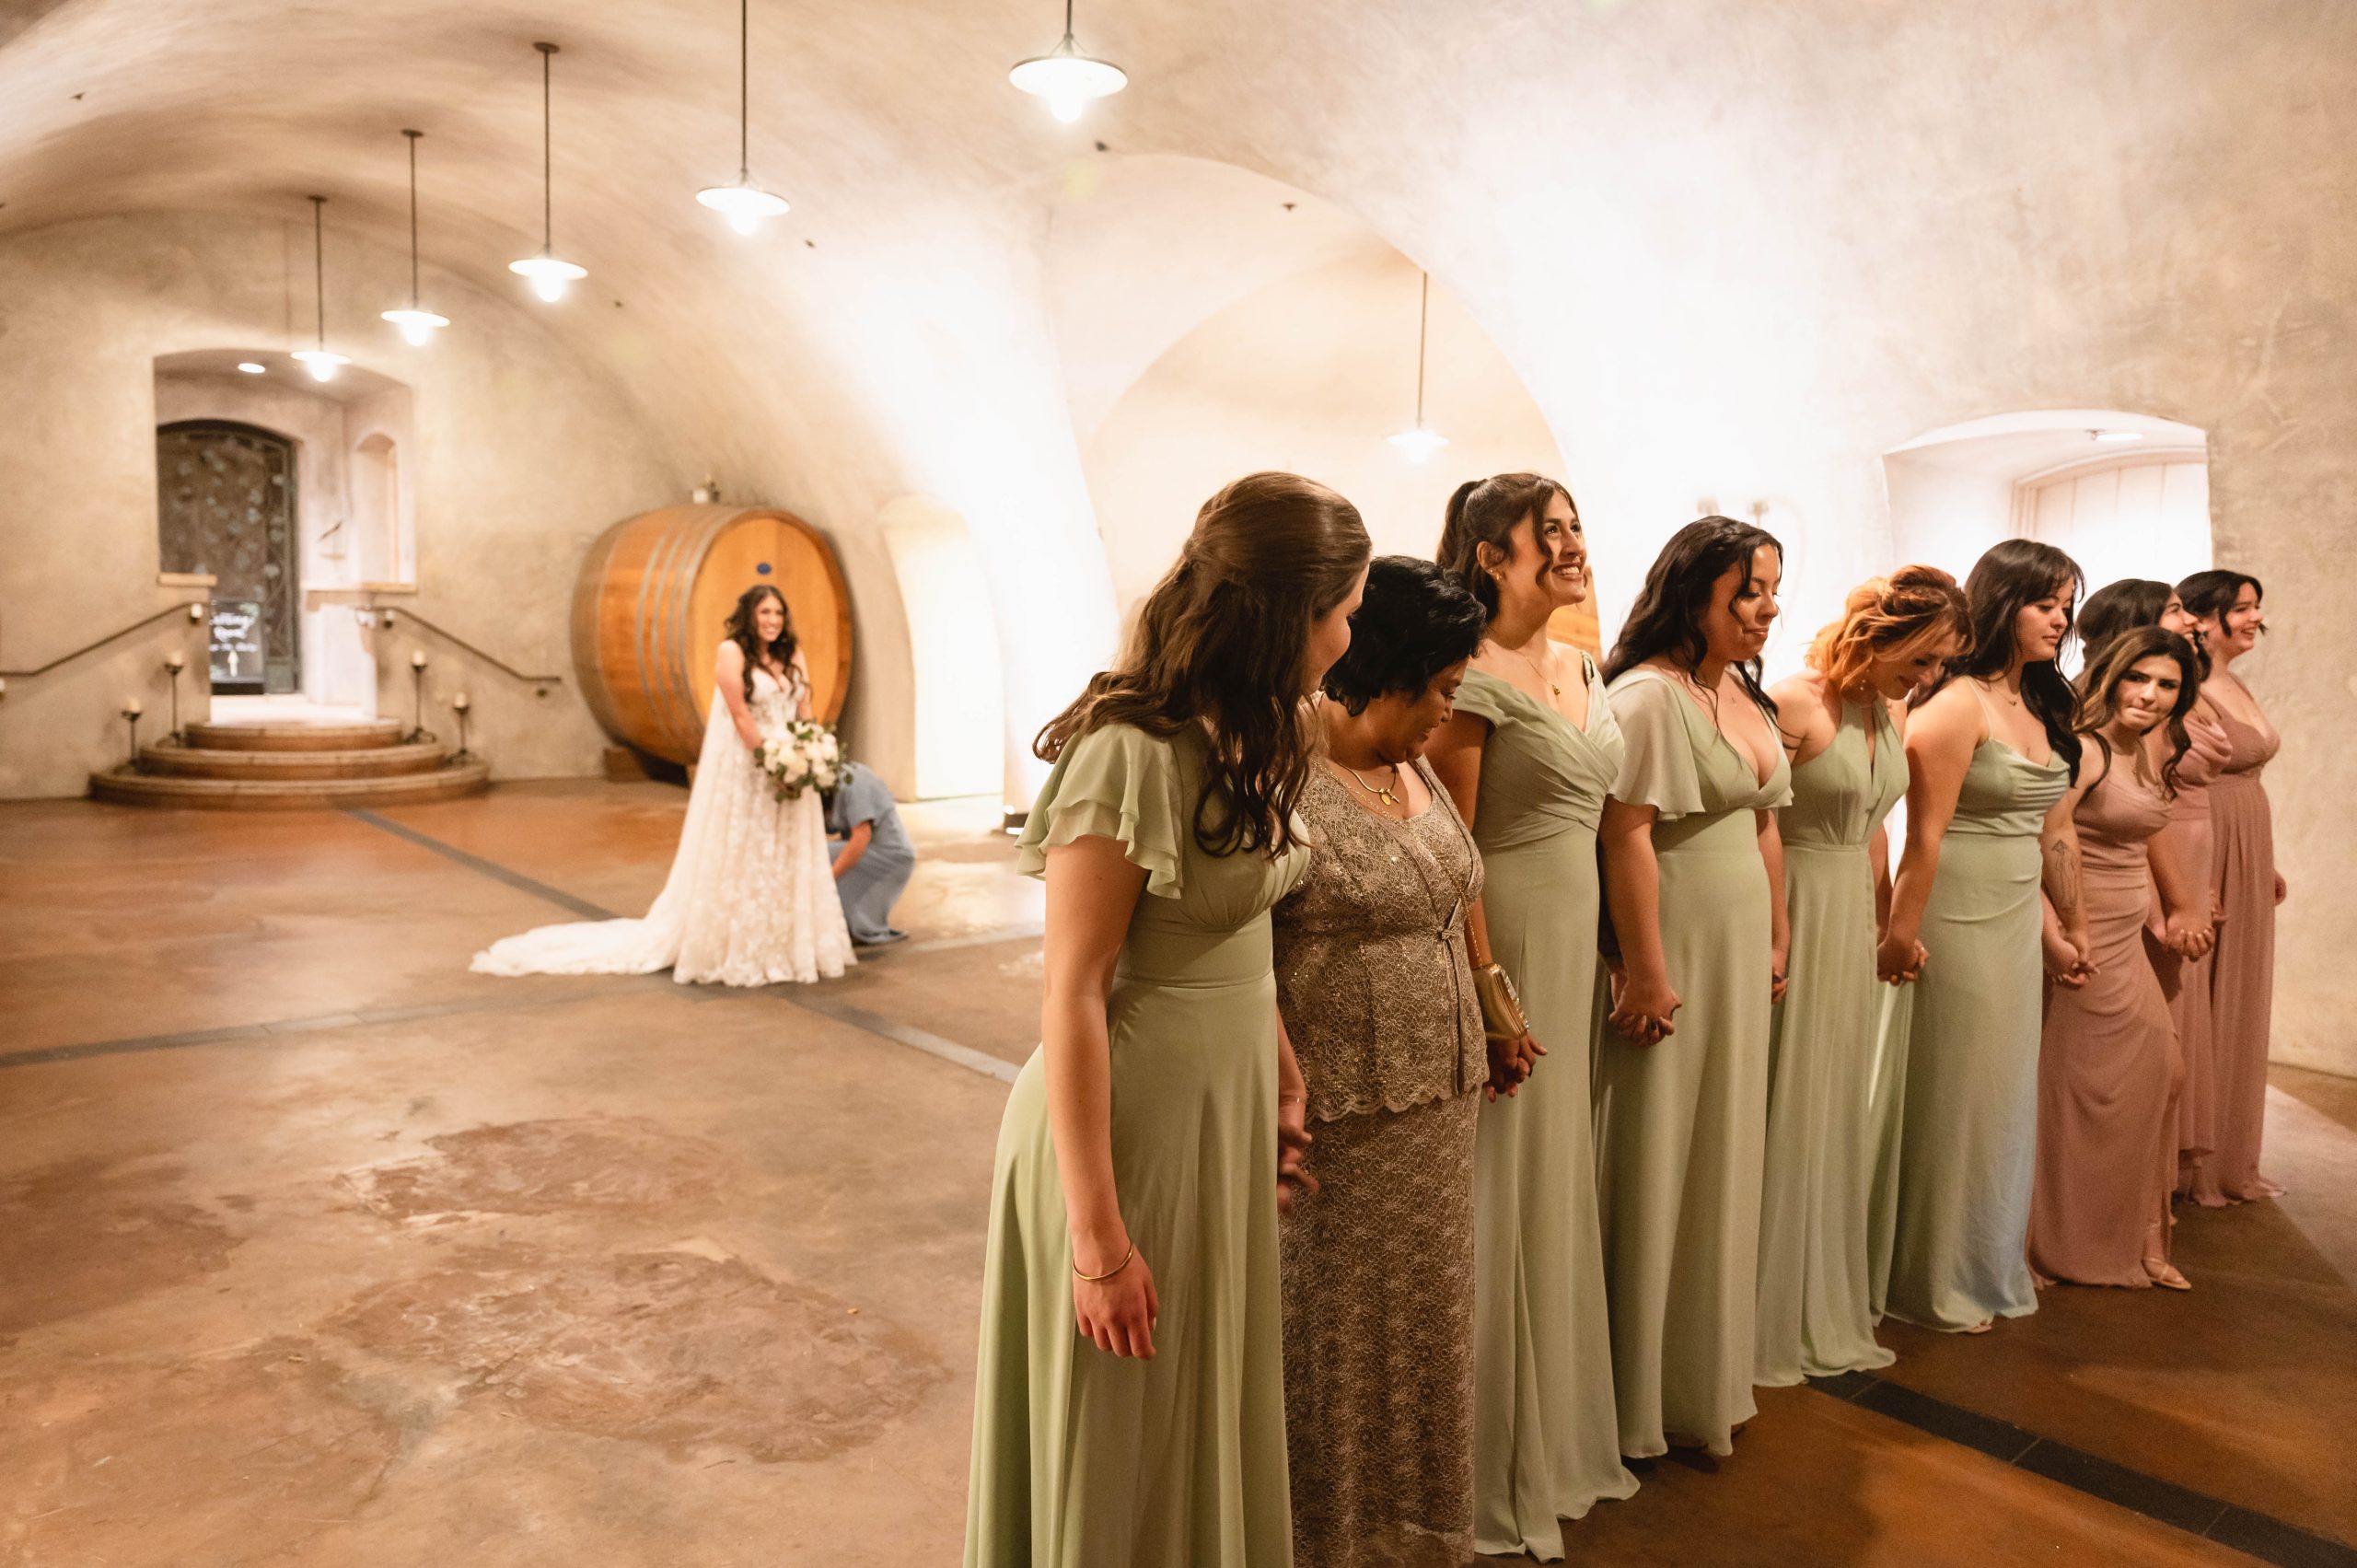 Bridesmaids and Maid of Honor (MOH) awaiting the bride revealing her wedding dress at Viansa Winery in Sonoma in the cellars